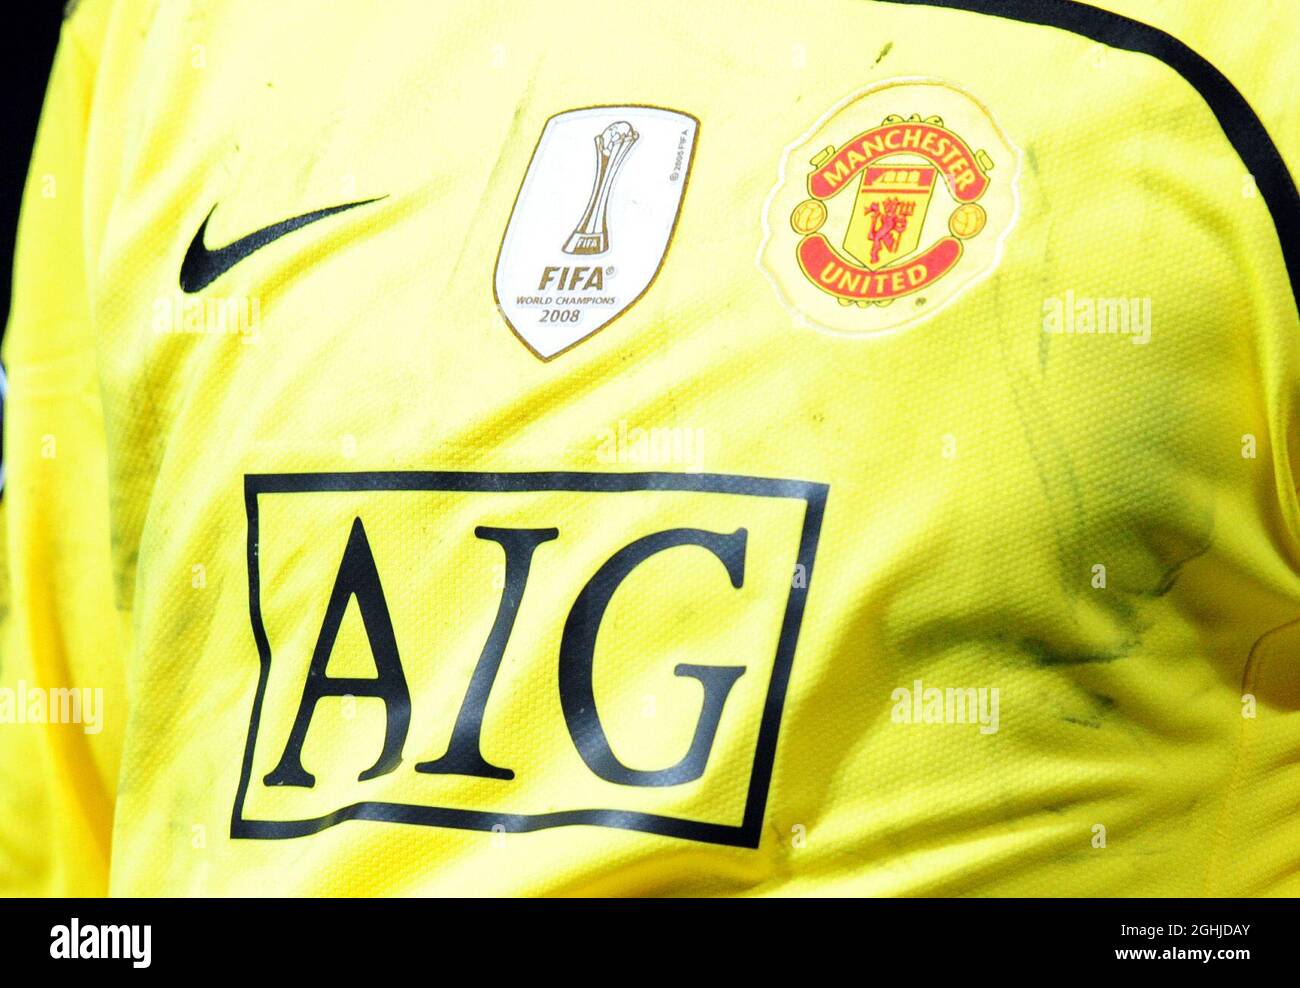 Manchester United club shirt with the FIFA world club champions badge, UEFA  Champions League, Manchester United vs. Internazionale Stock Photo - Alamy